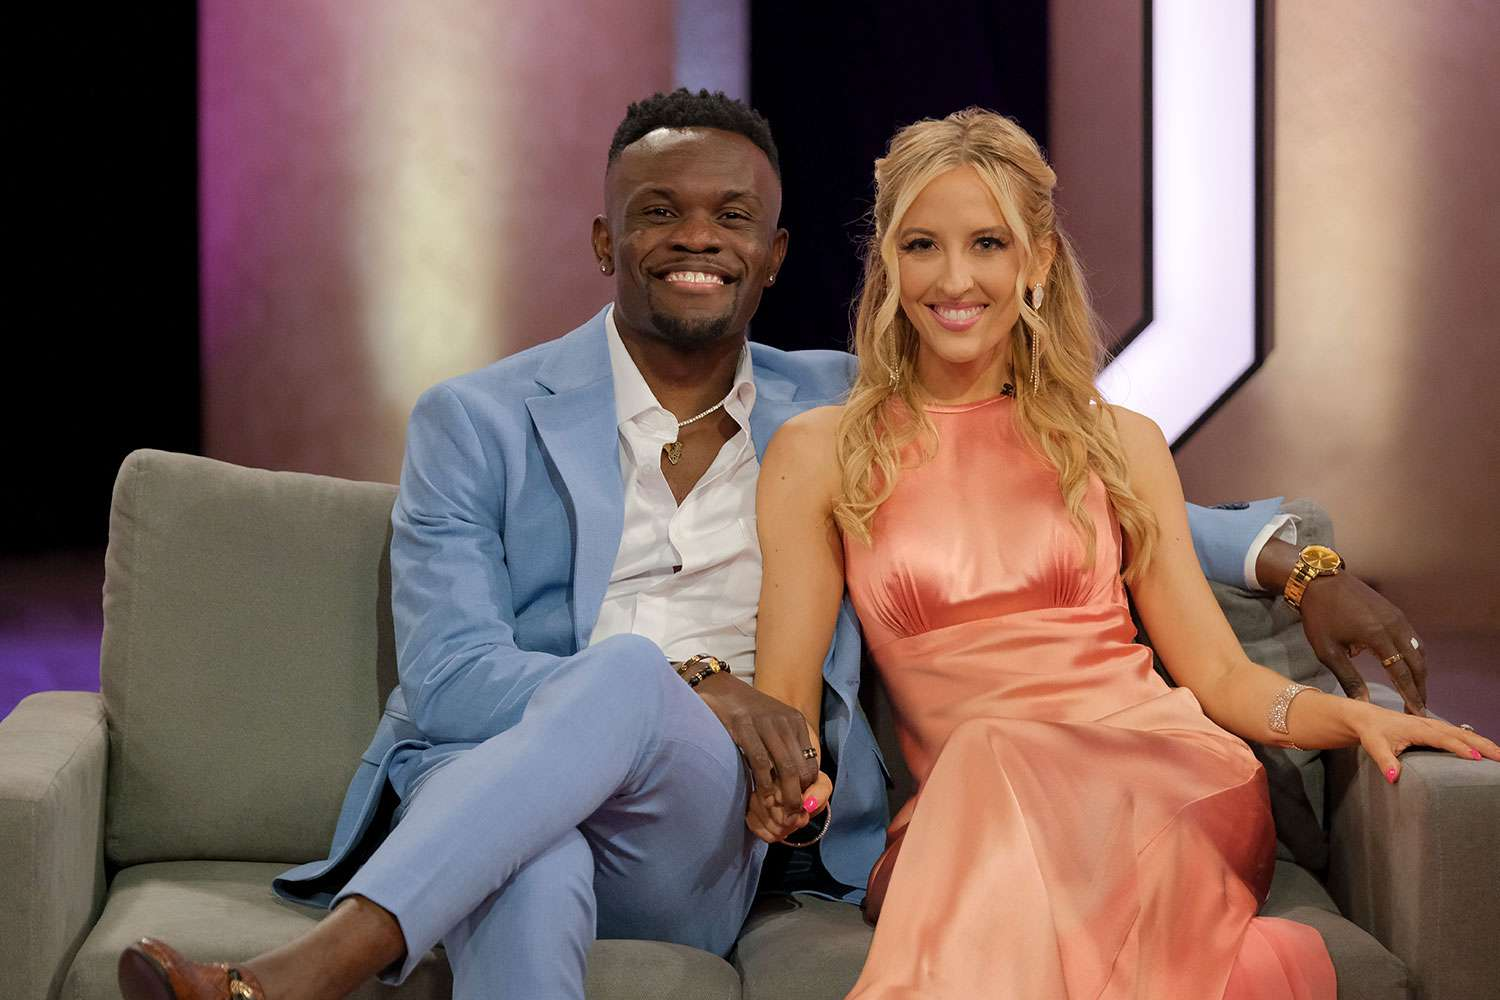 Kwame got married to Chelsea Griffin at the end of season 4